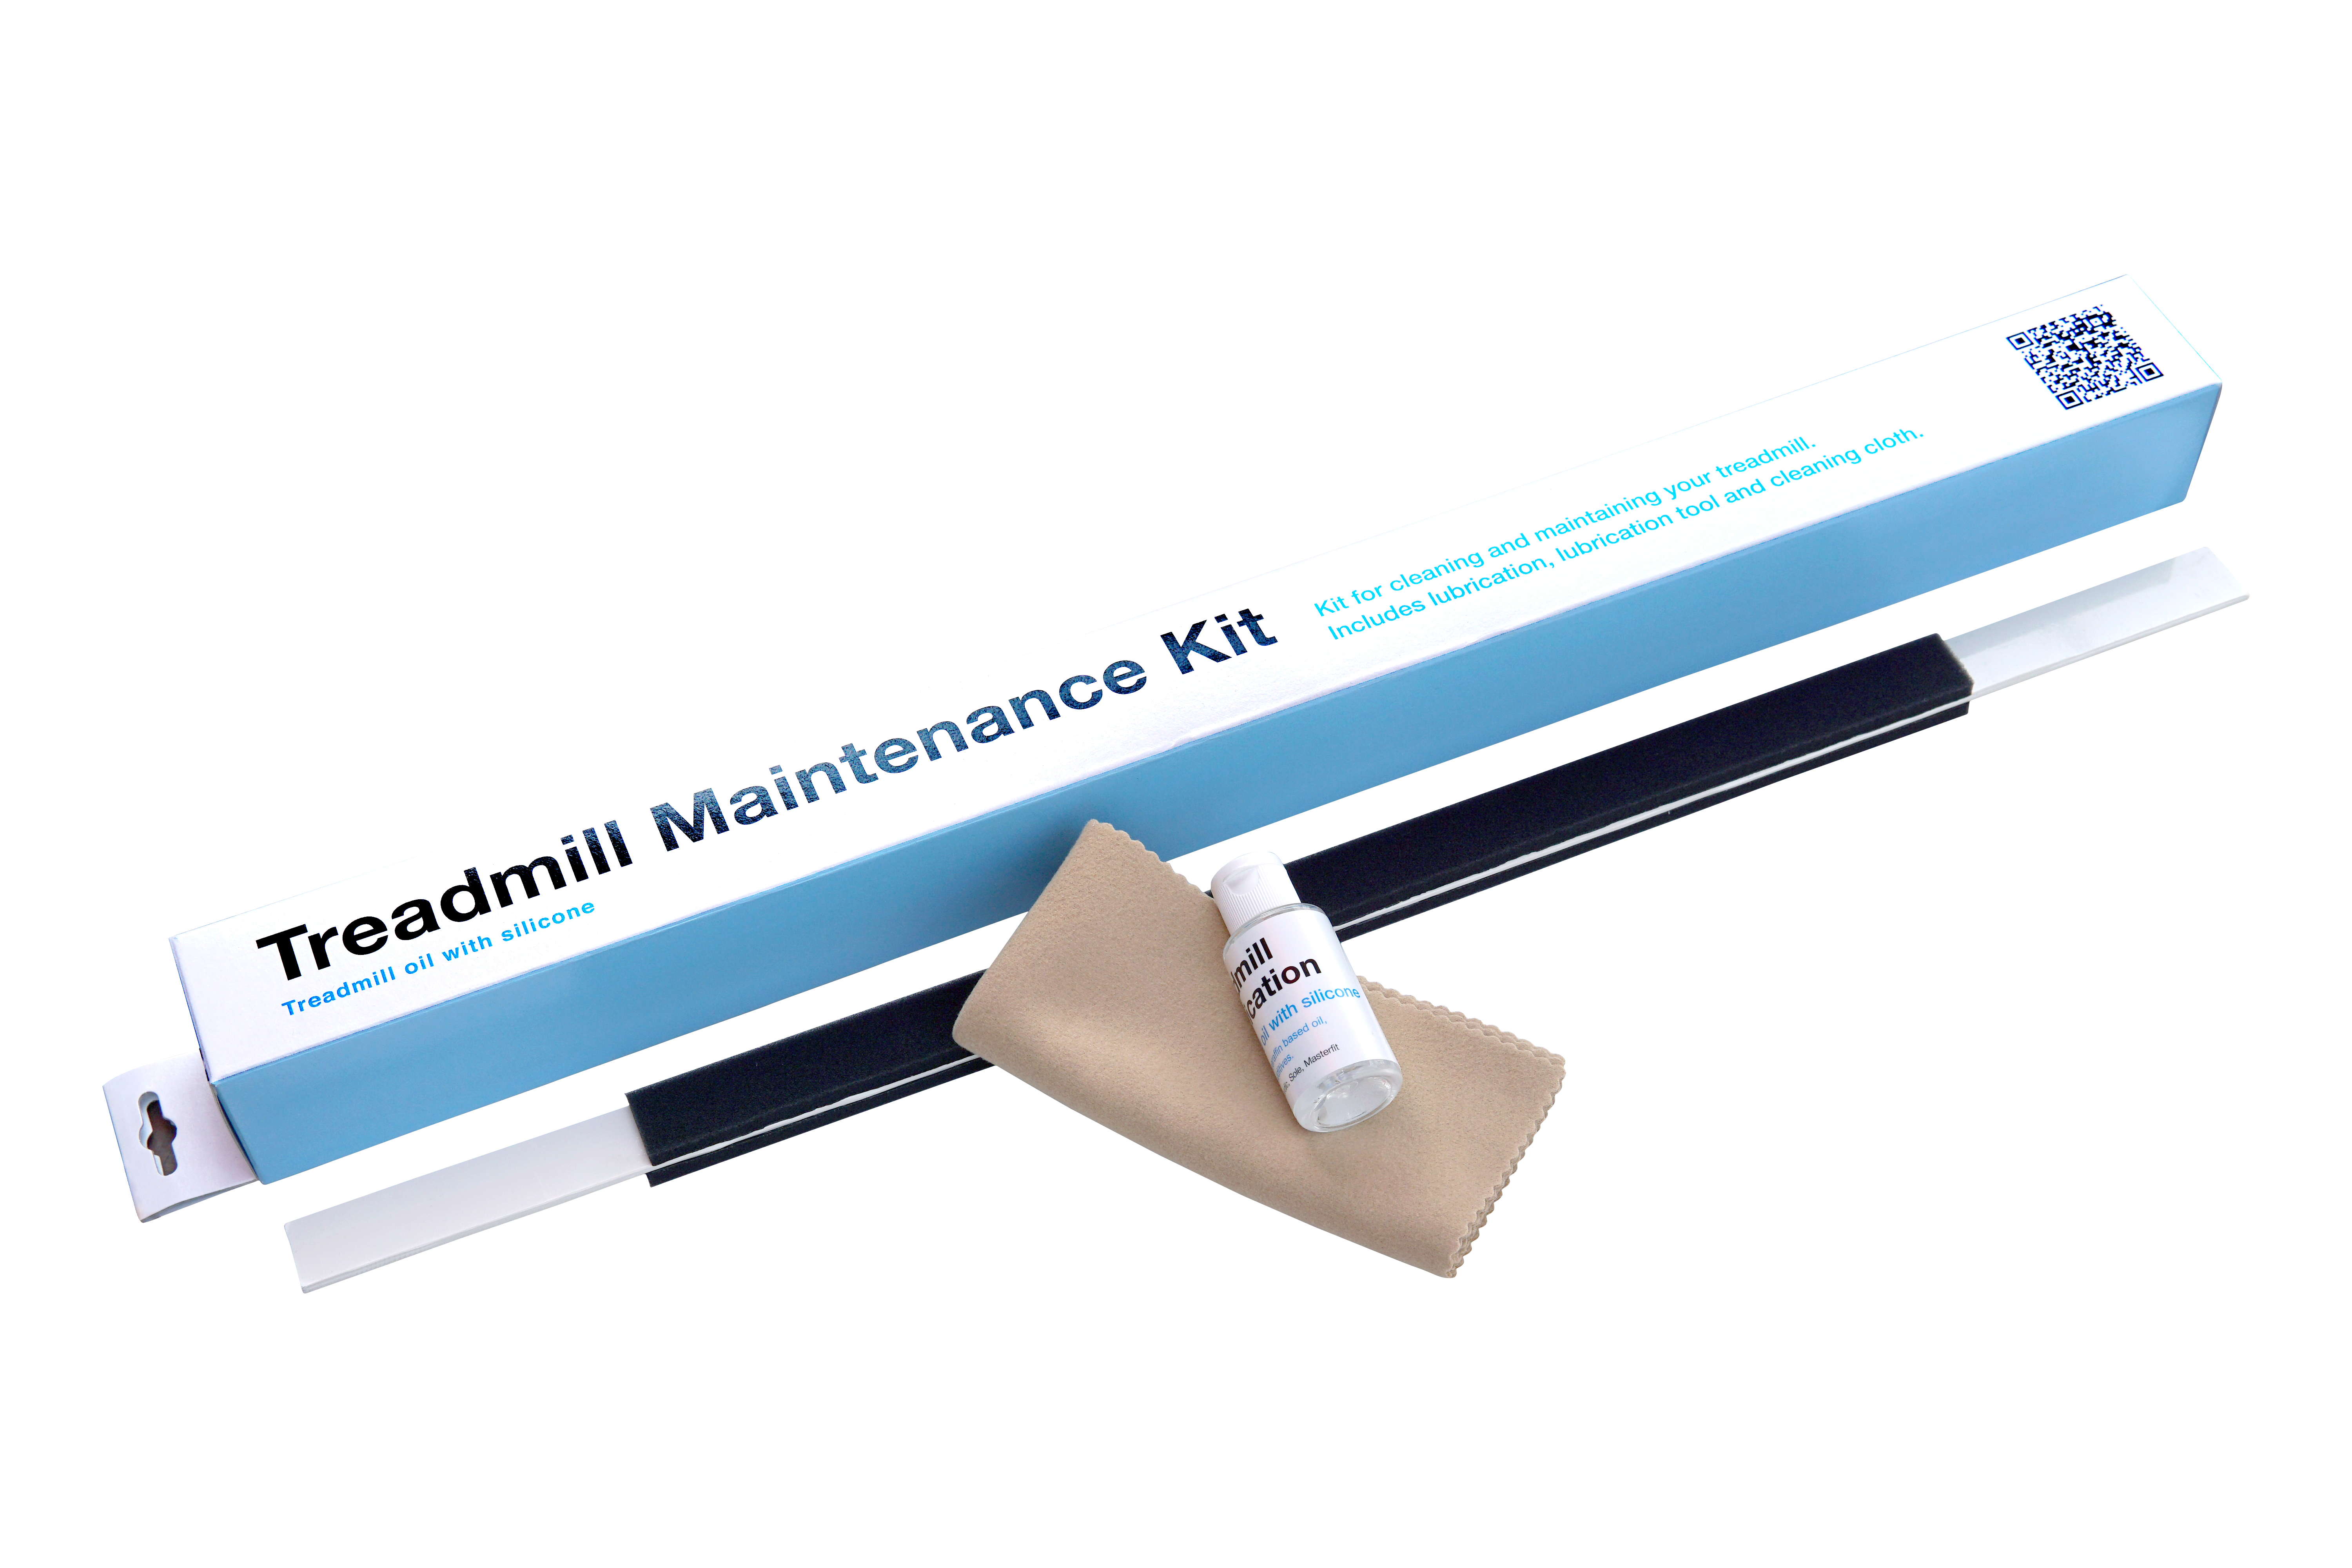 Treadmill Maintenance kit oil with Silicone